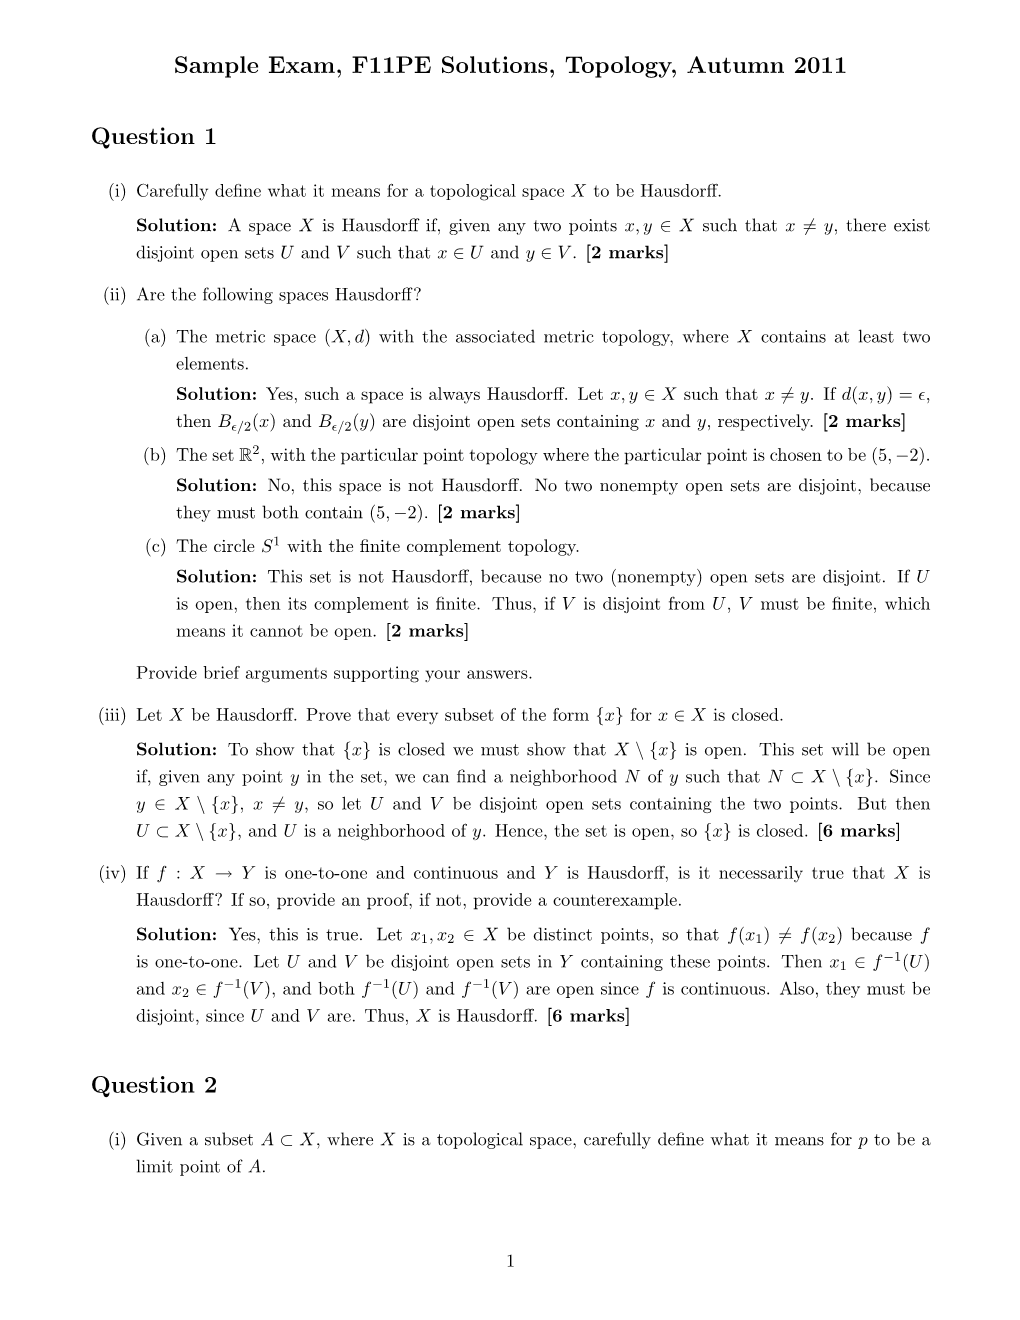 Sample Exam, F11PE Solutions, Topology, Autumn 2011 Question 1